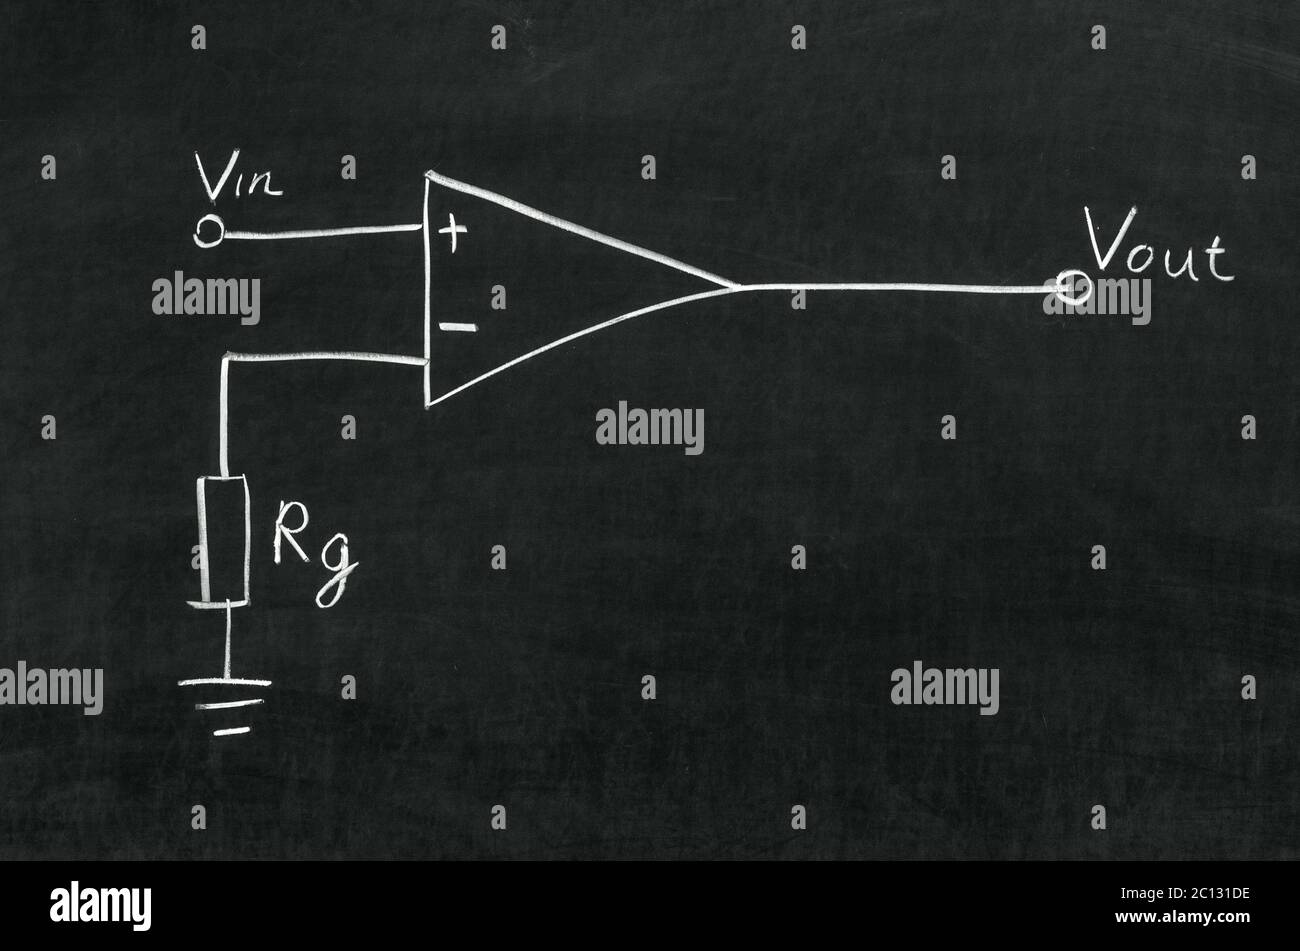 Operational amplifier circuit drawn on the blackboard with chalk Stock Photo